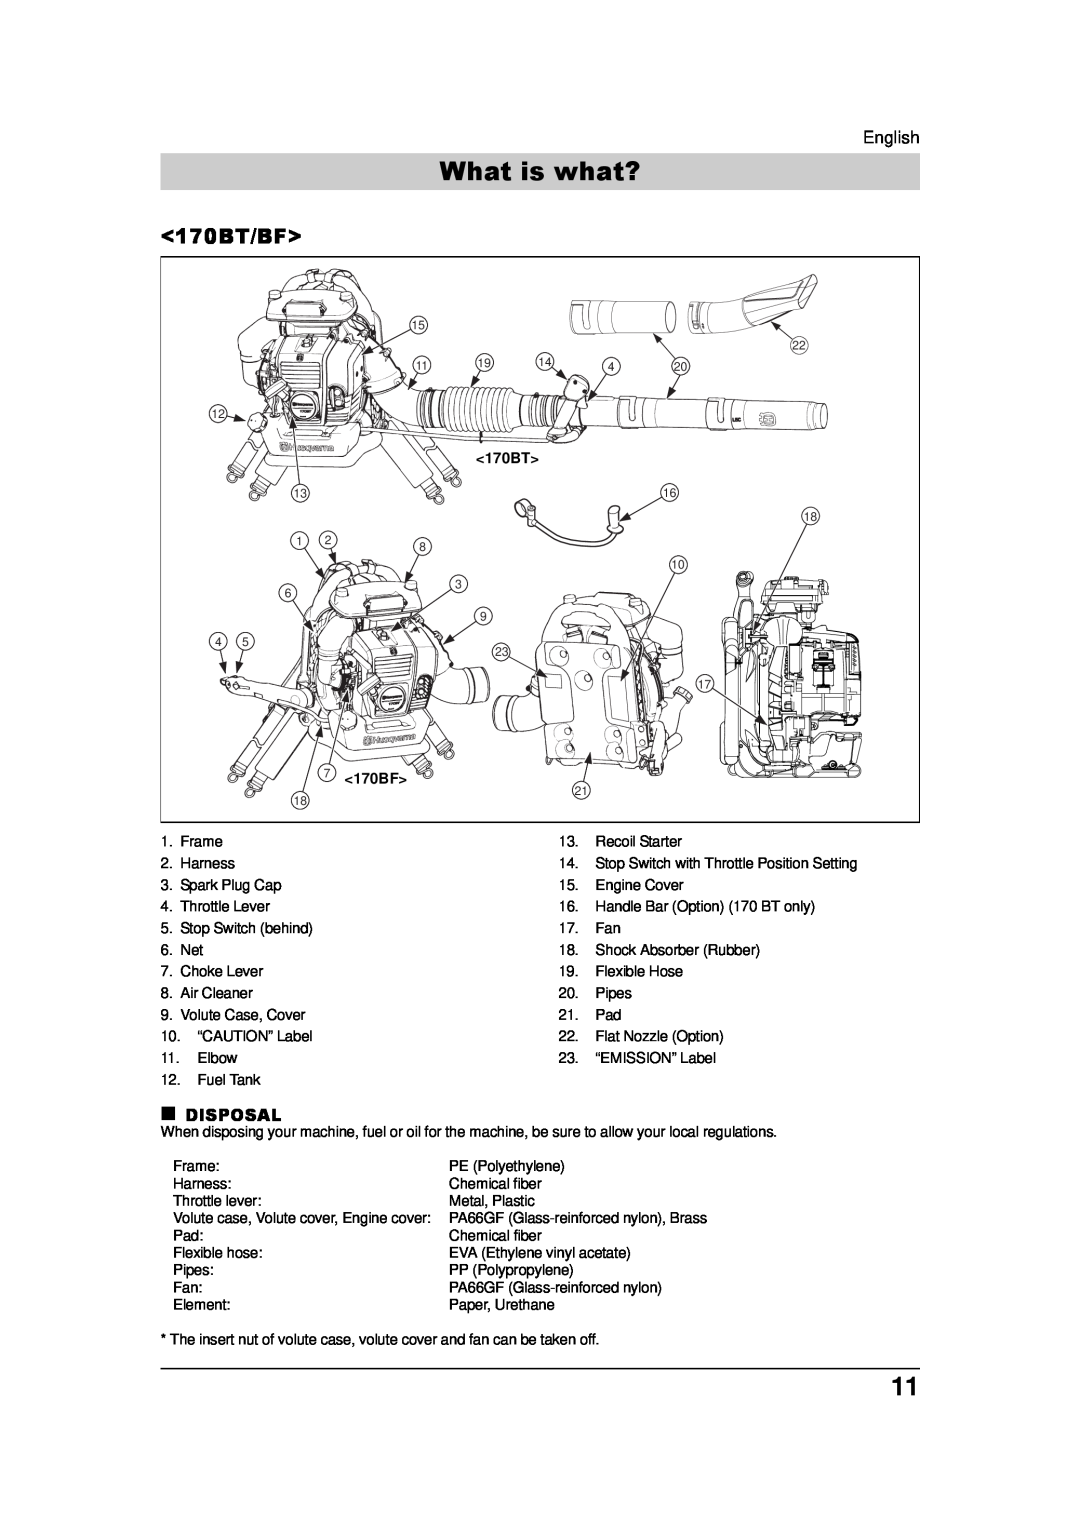 Husqvarna 180BF, 150BF, 115 09 83-95 manual What is what?, 170BT/BF, 170BF 